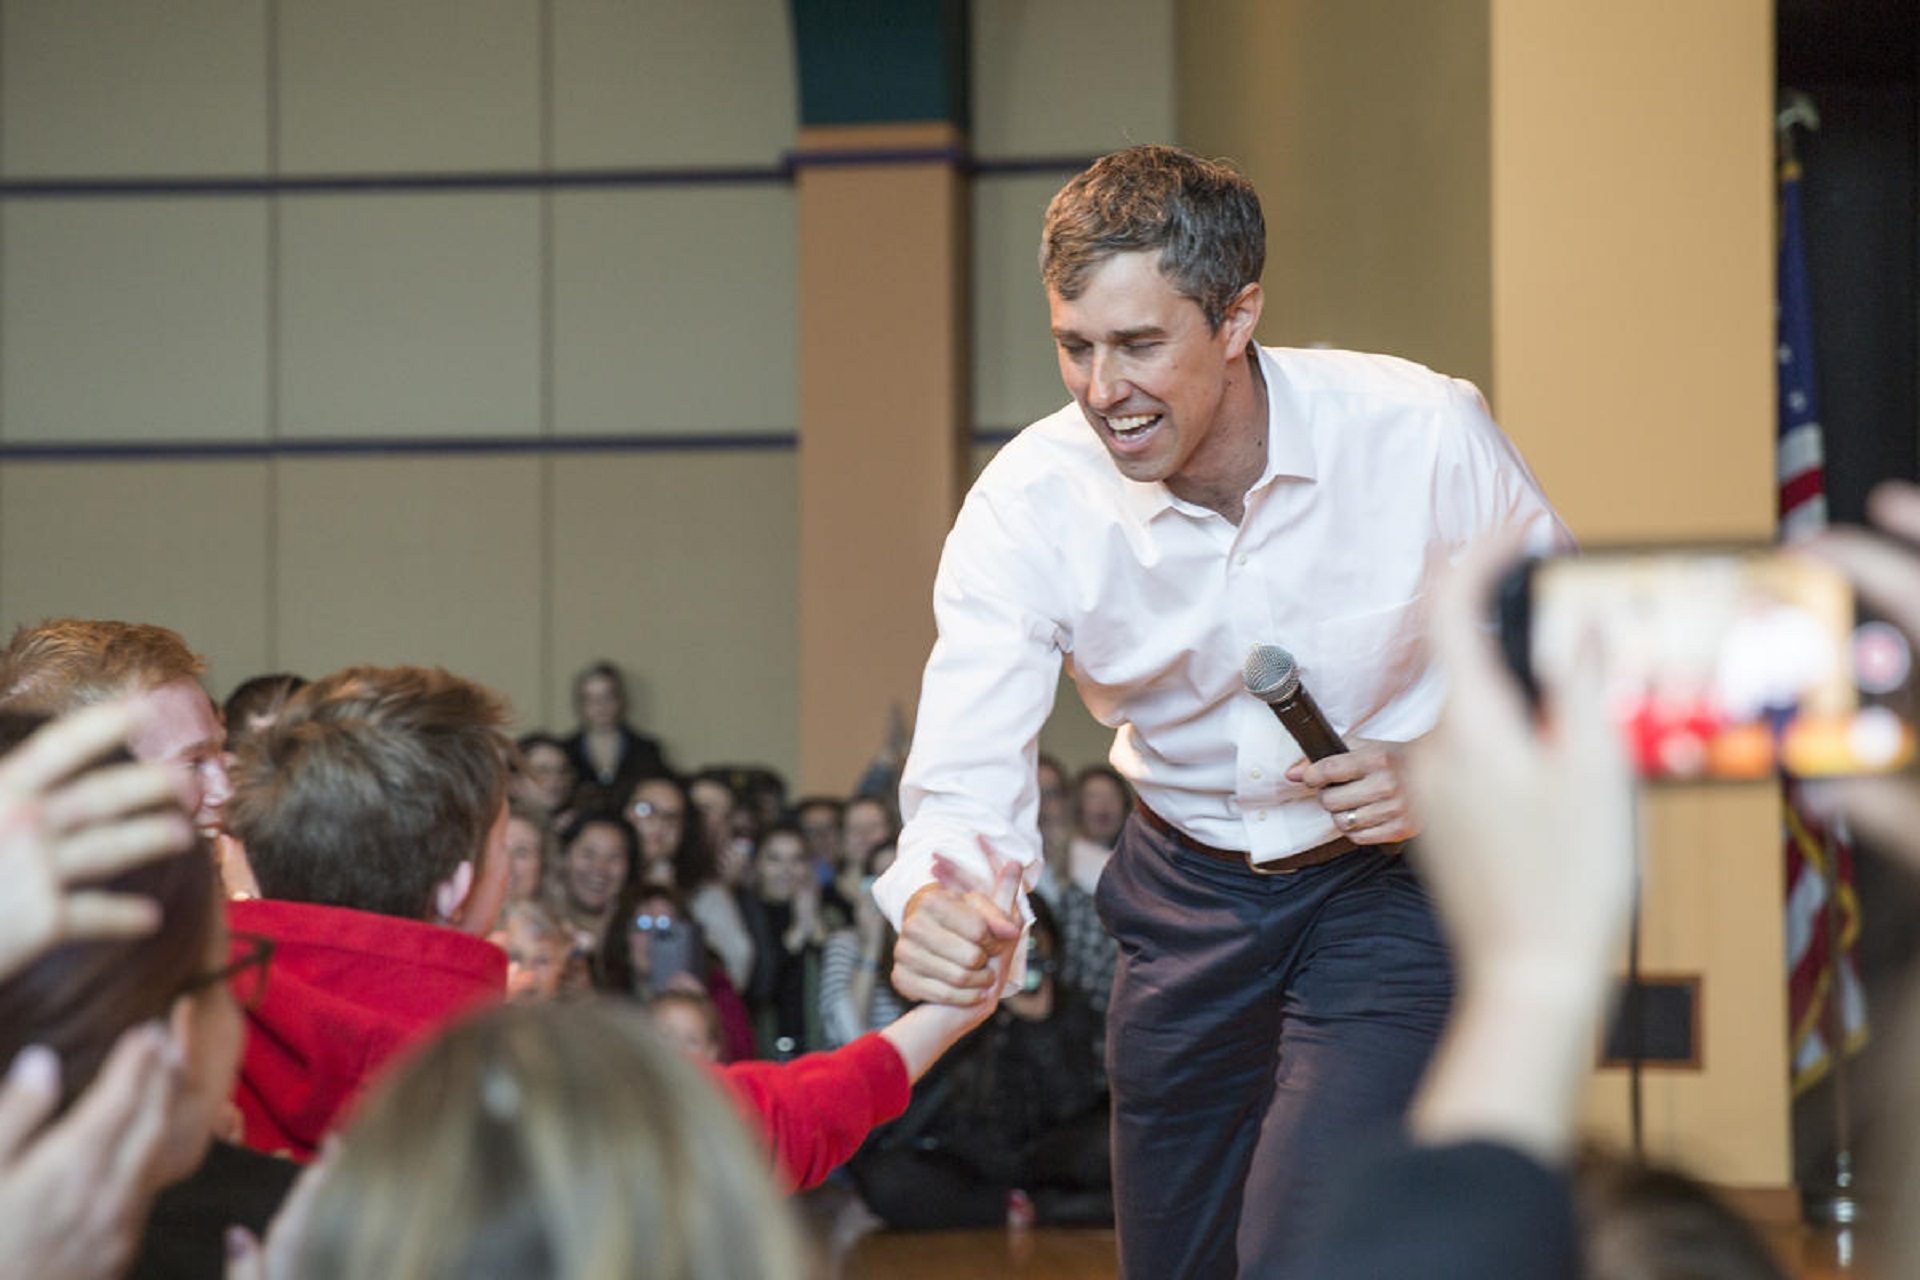 Democratic presidential candidate Beto O’Rourke visited Penn State University Park on Tuesday, March 19.